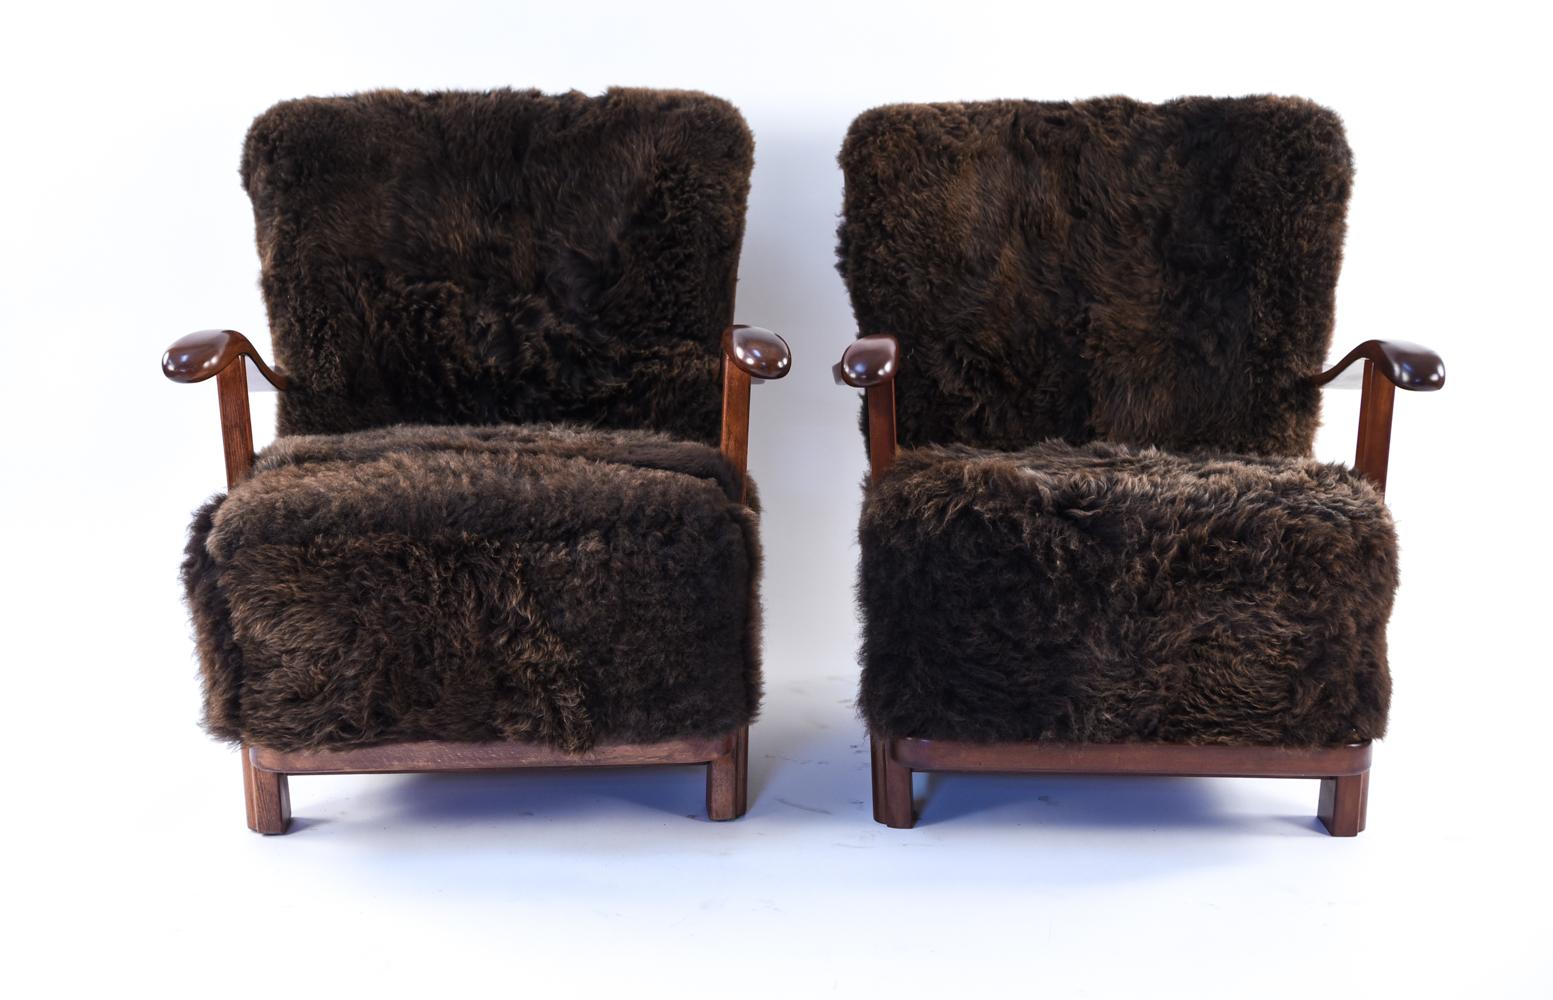 A gorgeous pair of Danish mid-century model 1594 lounge chairs by Fritz Hansen. A highly sought after design which has been upholstered in rich, brown lamb's wool. Incredibly soft and comfortable, these chairs provide a perfect place to relax with